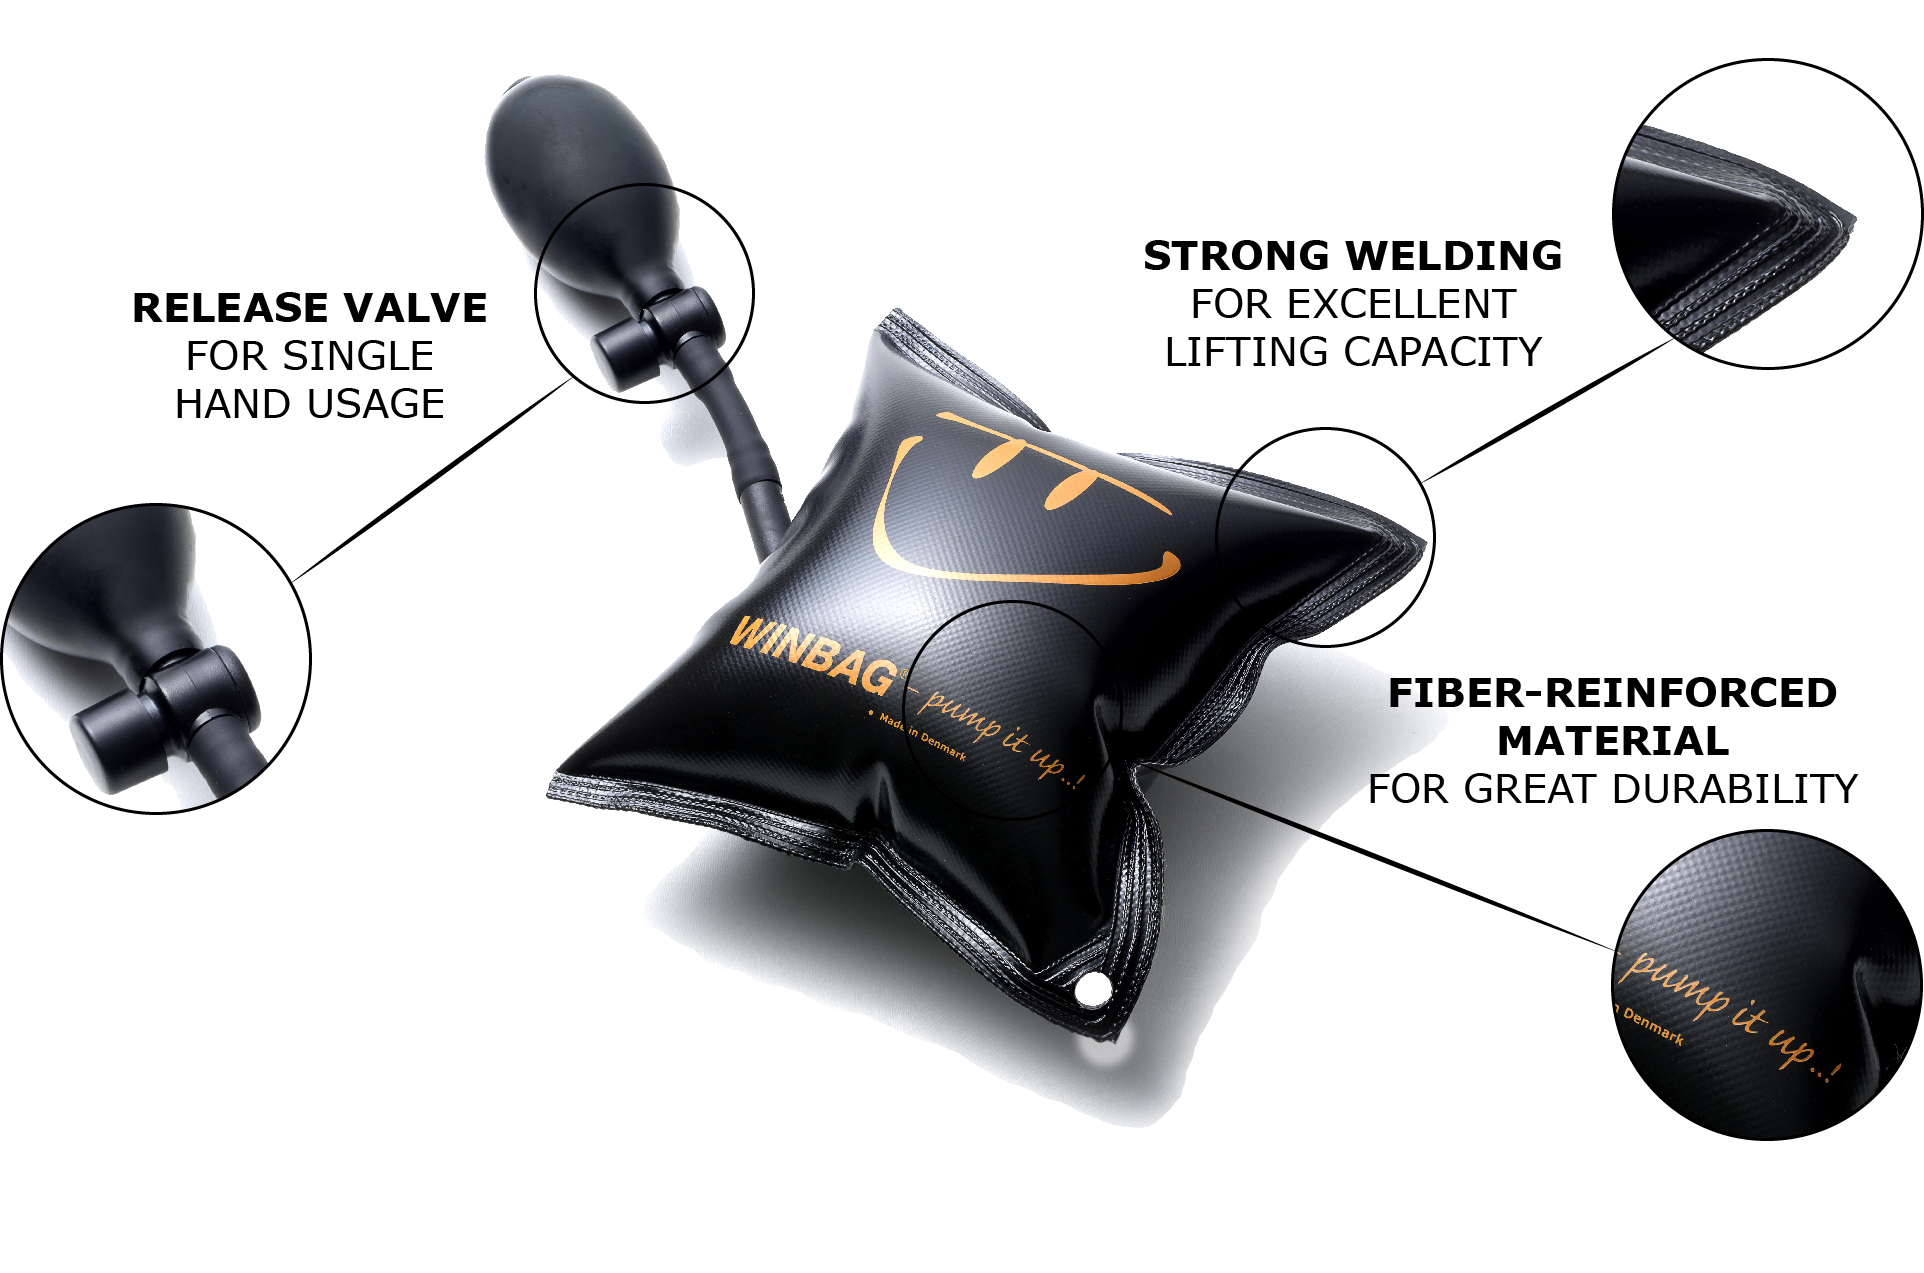 Winbag Original Patented Air Wedge and Leveling Tool. Lifts up to